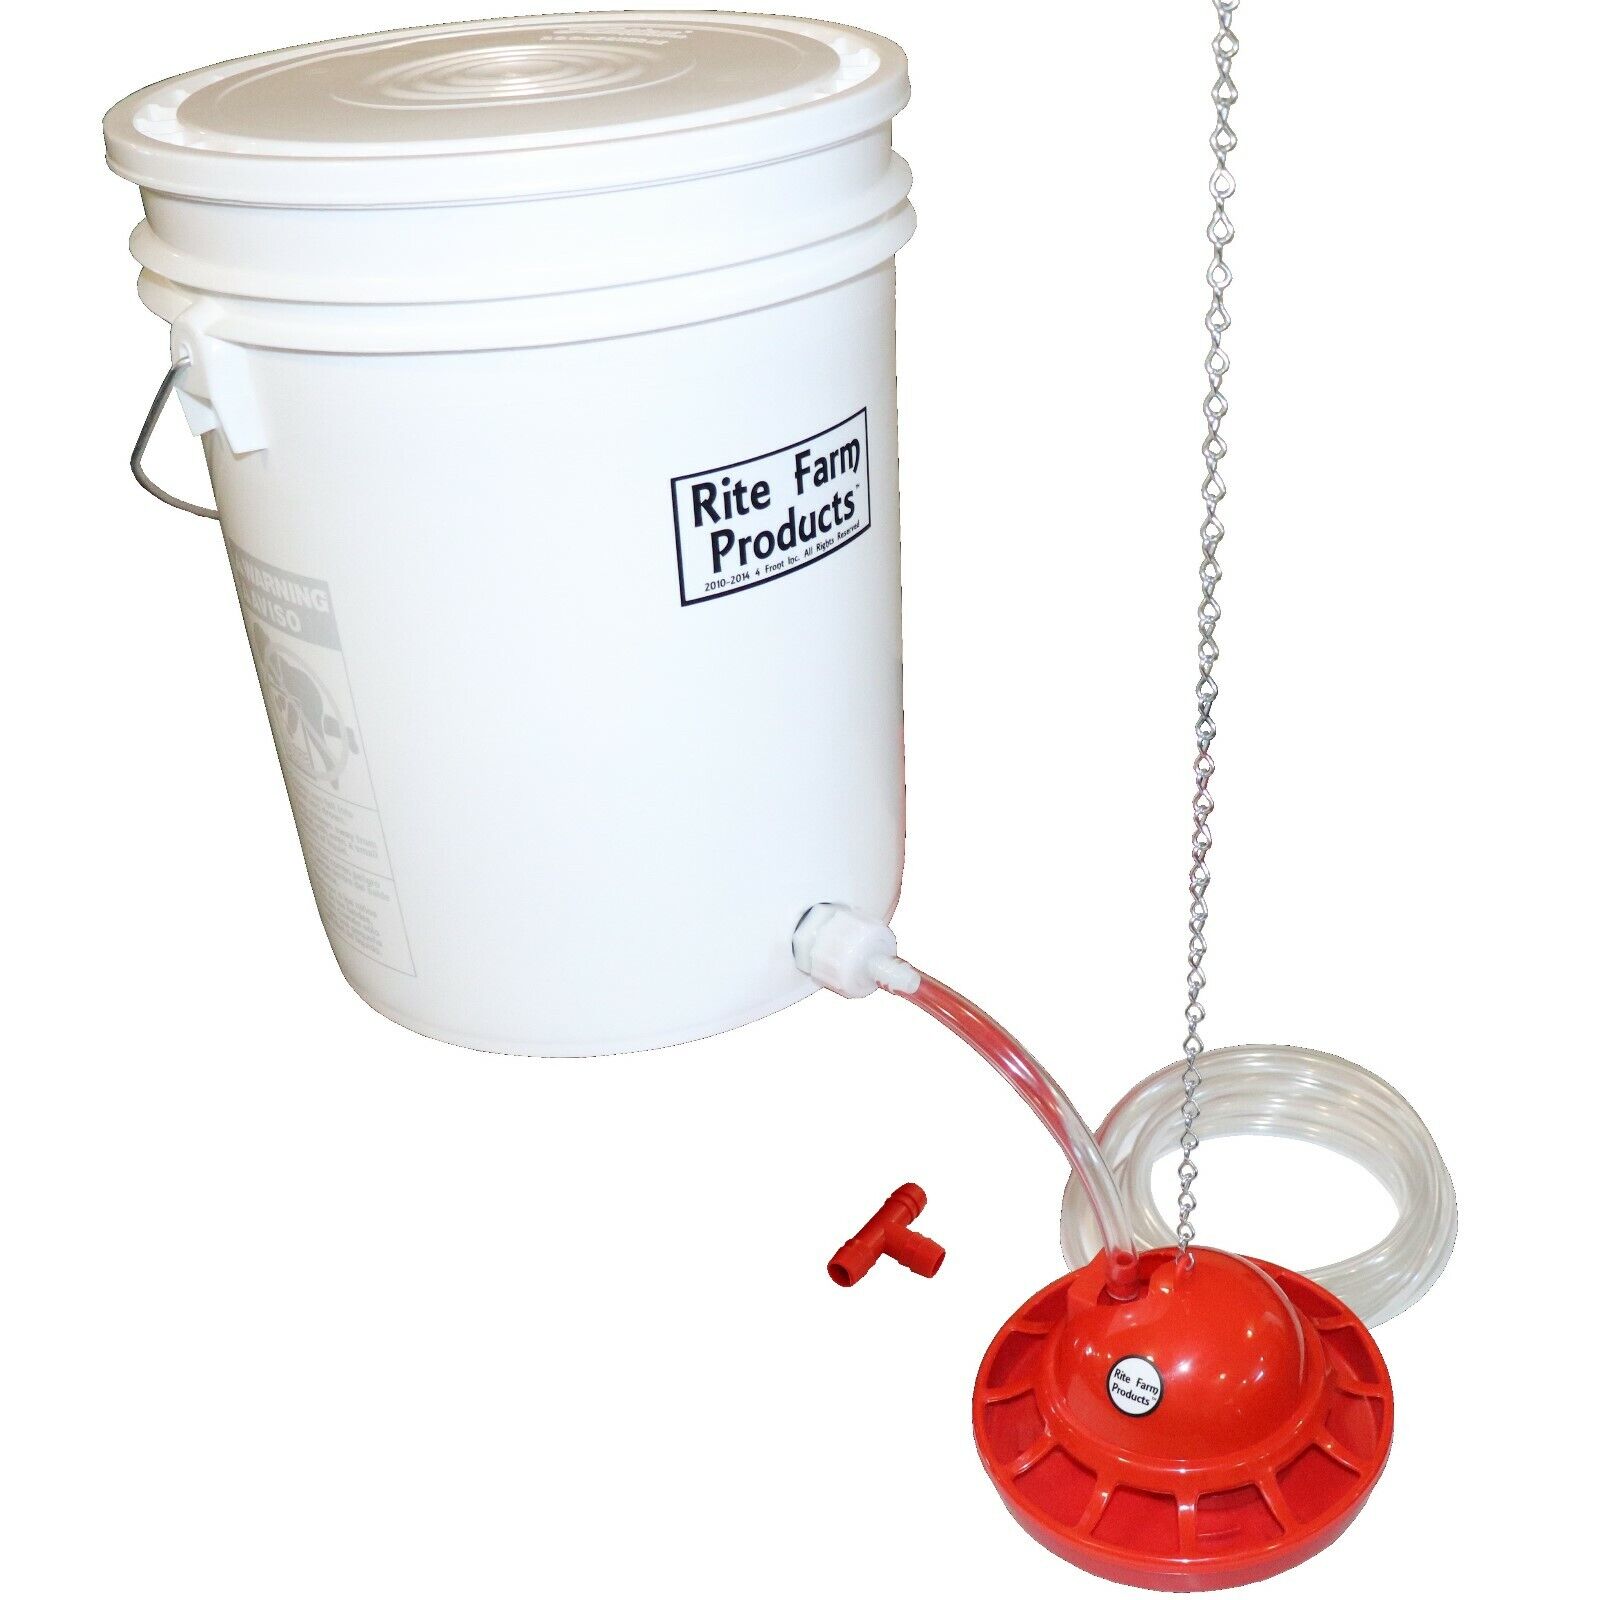 RITE FARM PRODUCTS AUTO PRO CHICK WATERER COMPLETE KIT CHICKEN DRINKER AUTOMATIC